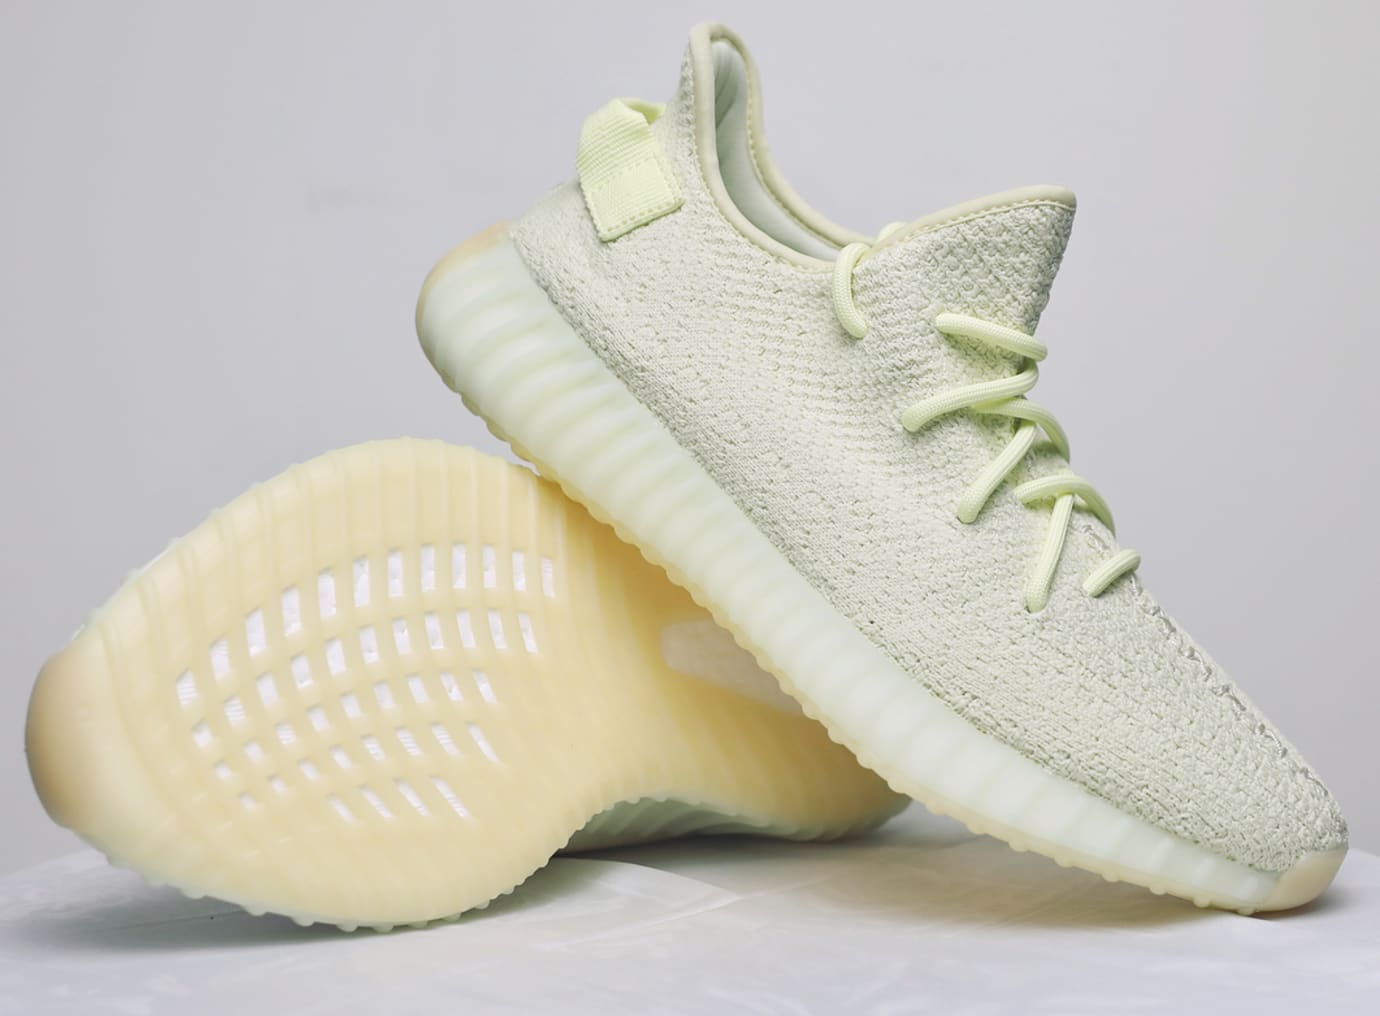 Adidas Yeezy Boost 350 V2 'Butter' (Pair)